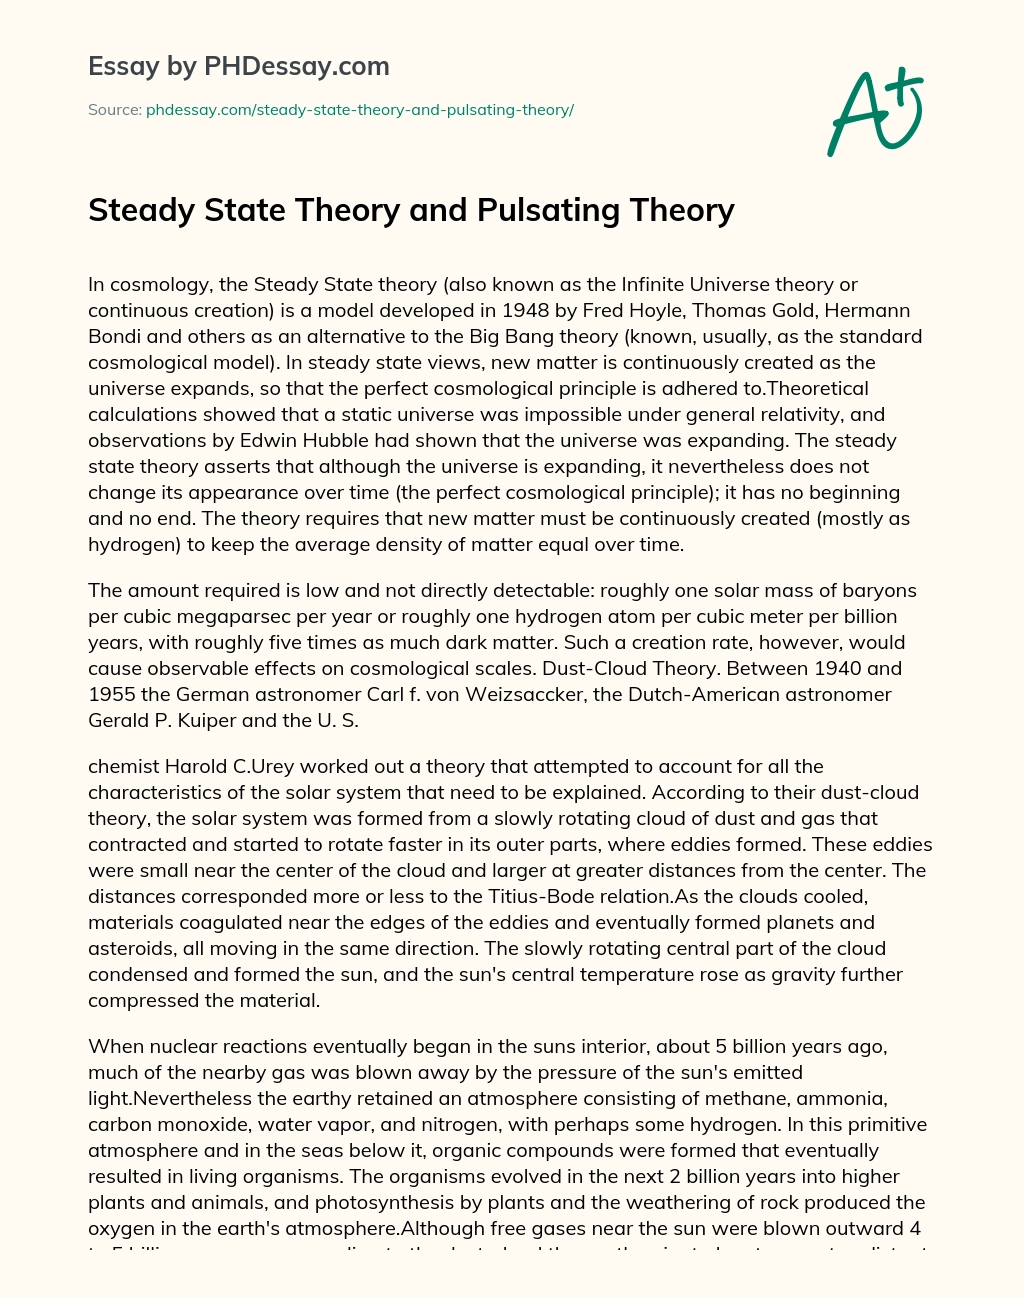 Steady State Theory and Pulsating Theory essay